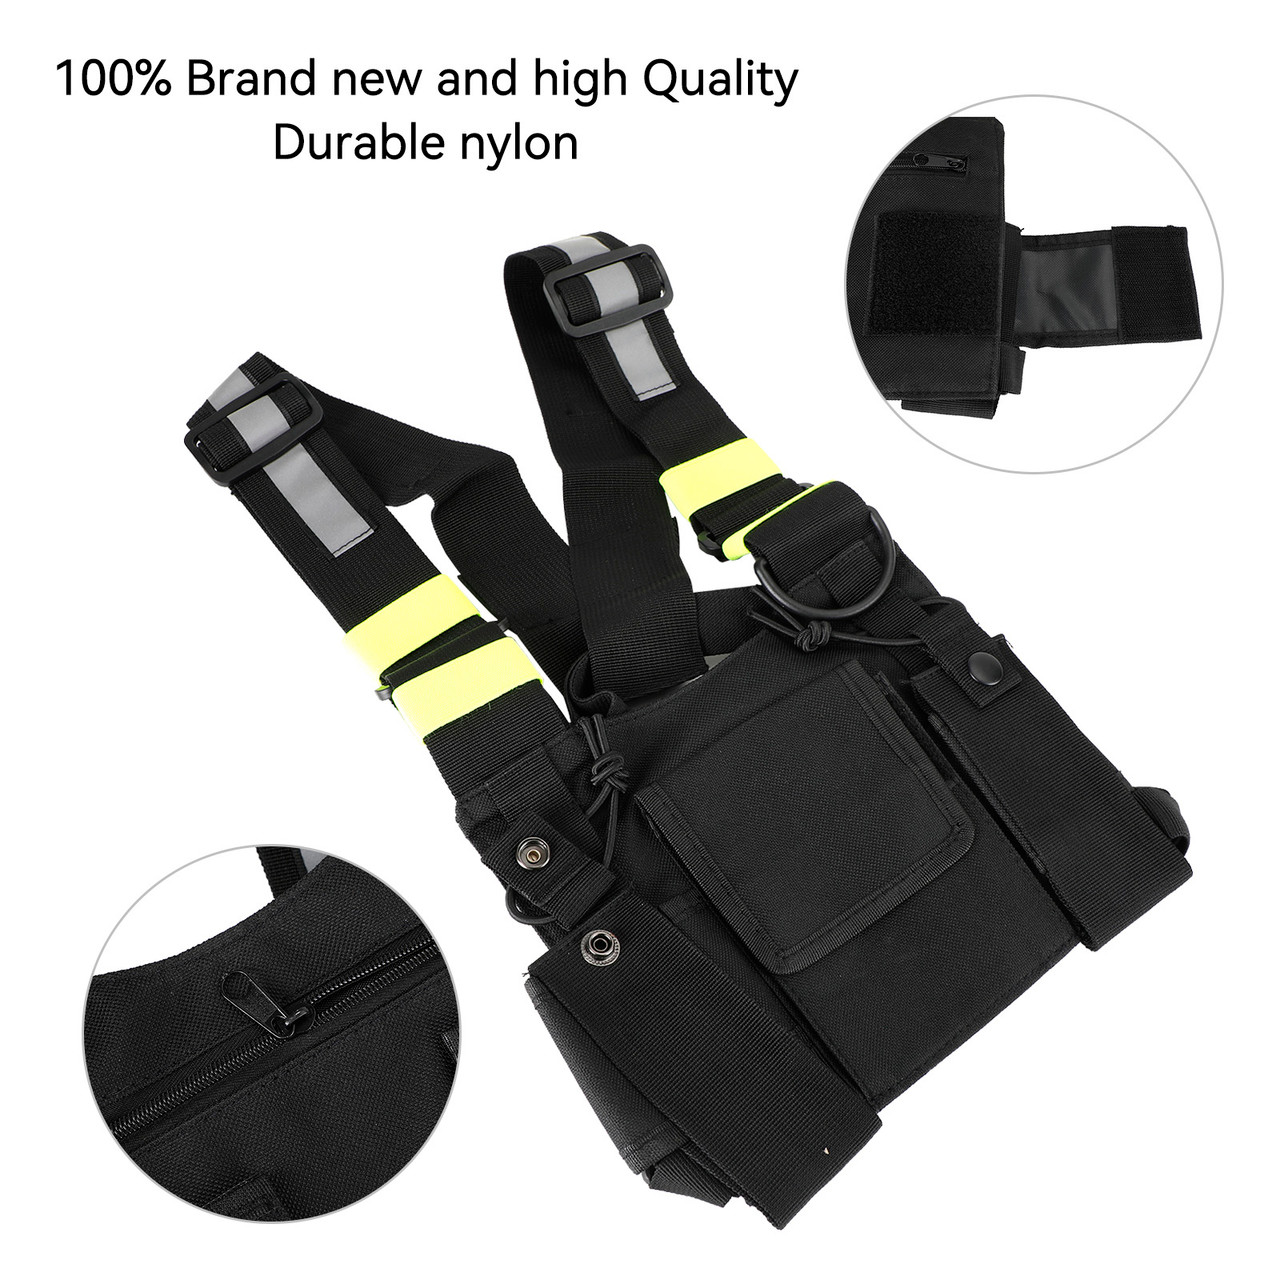 Tactical Chest Harness Bag for Field Operations Radio Fluorescent ...